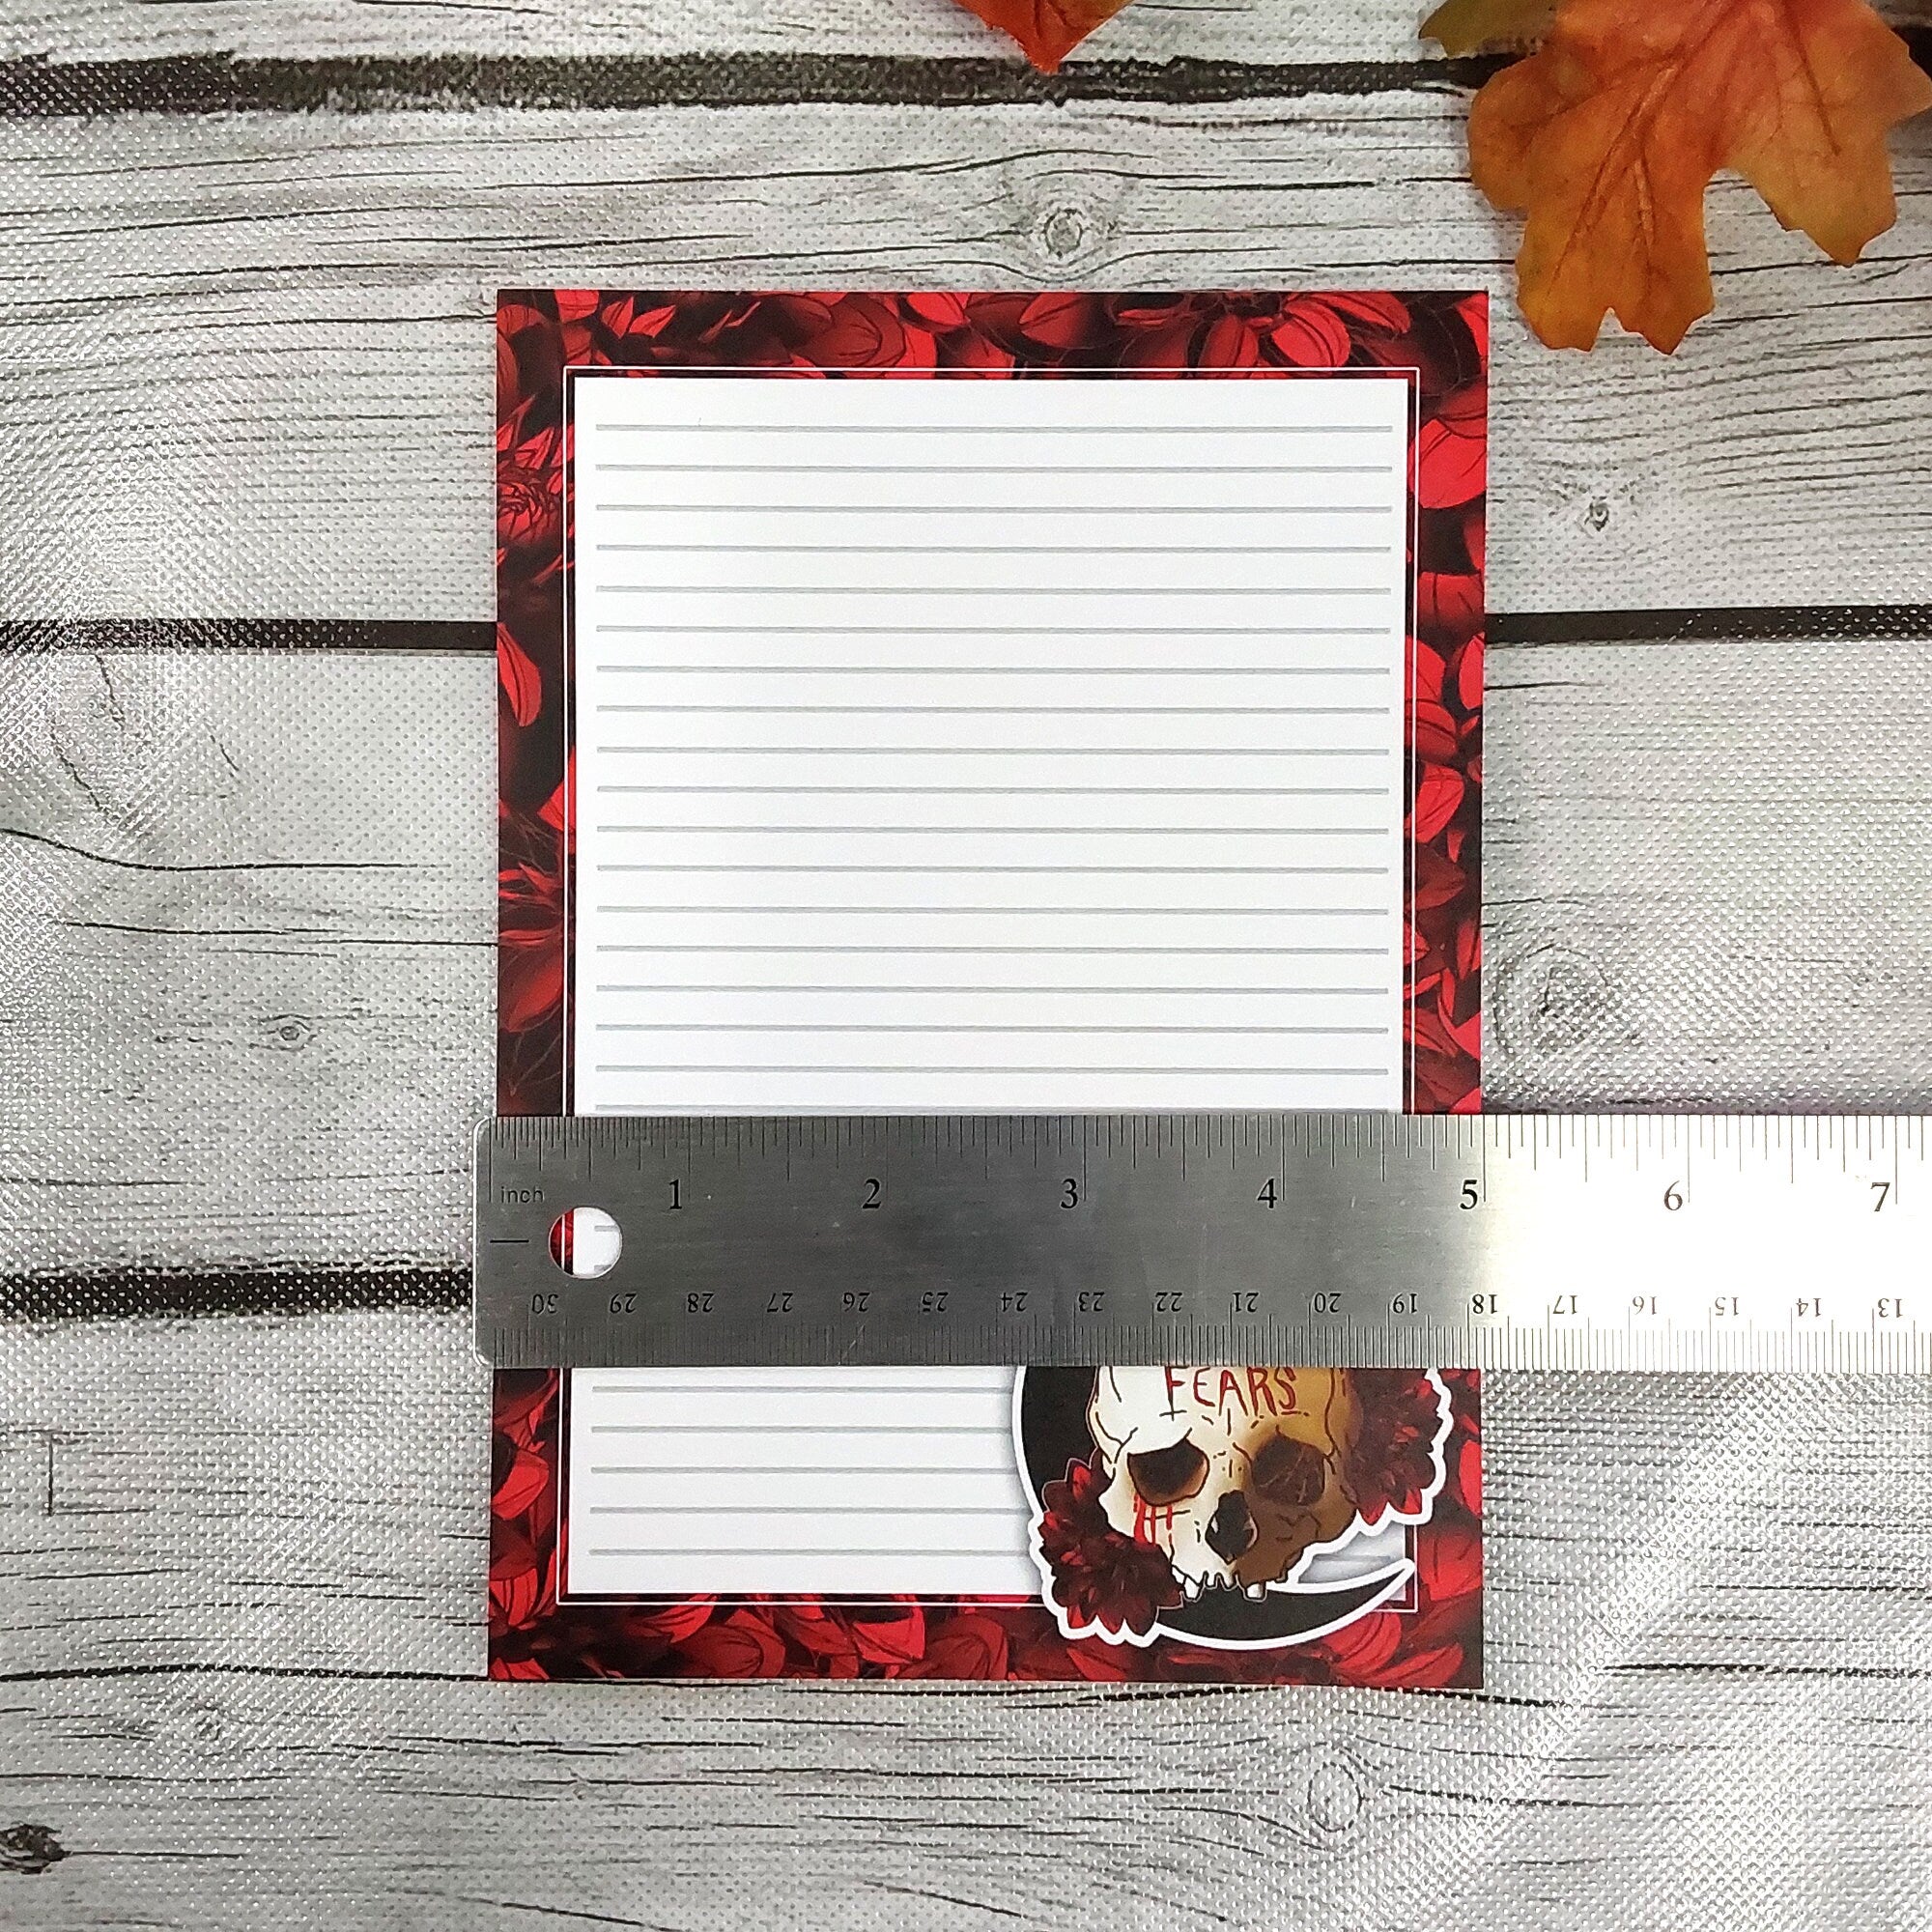 NOTEPAD: Harness Your Fears Skull and Dahlia Flowers , Red and Black Skull Stationery , Skull and Floral Art , Skull Art , Floral Art